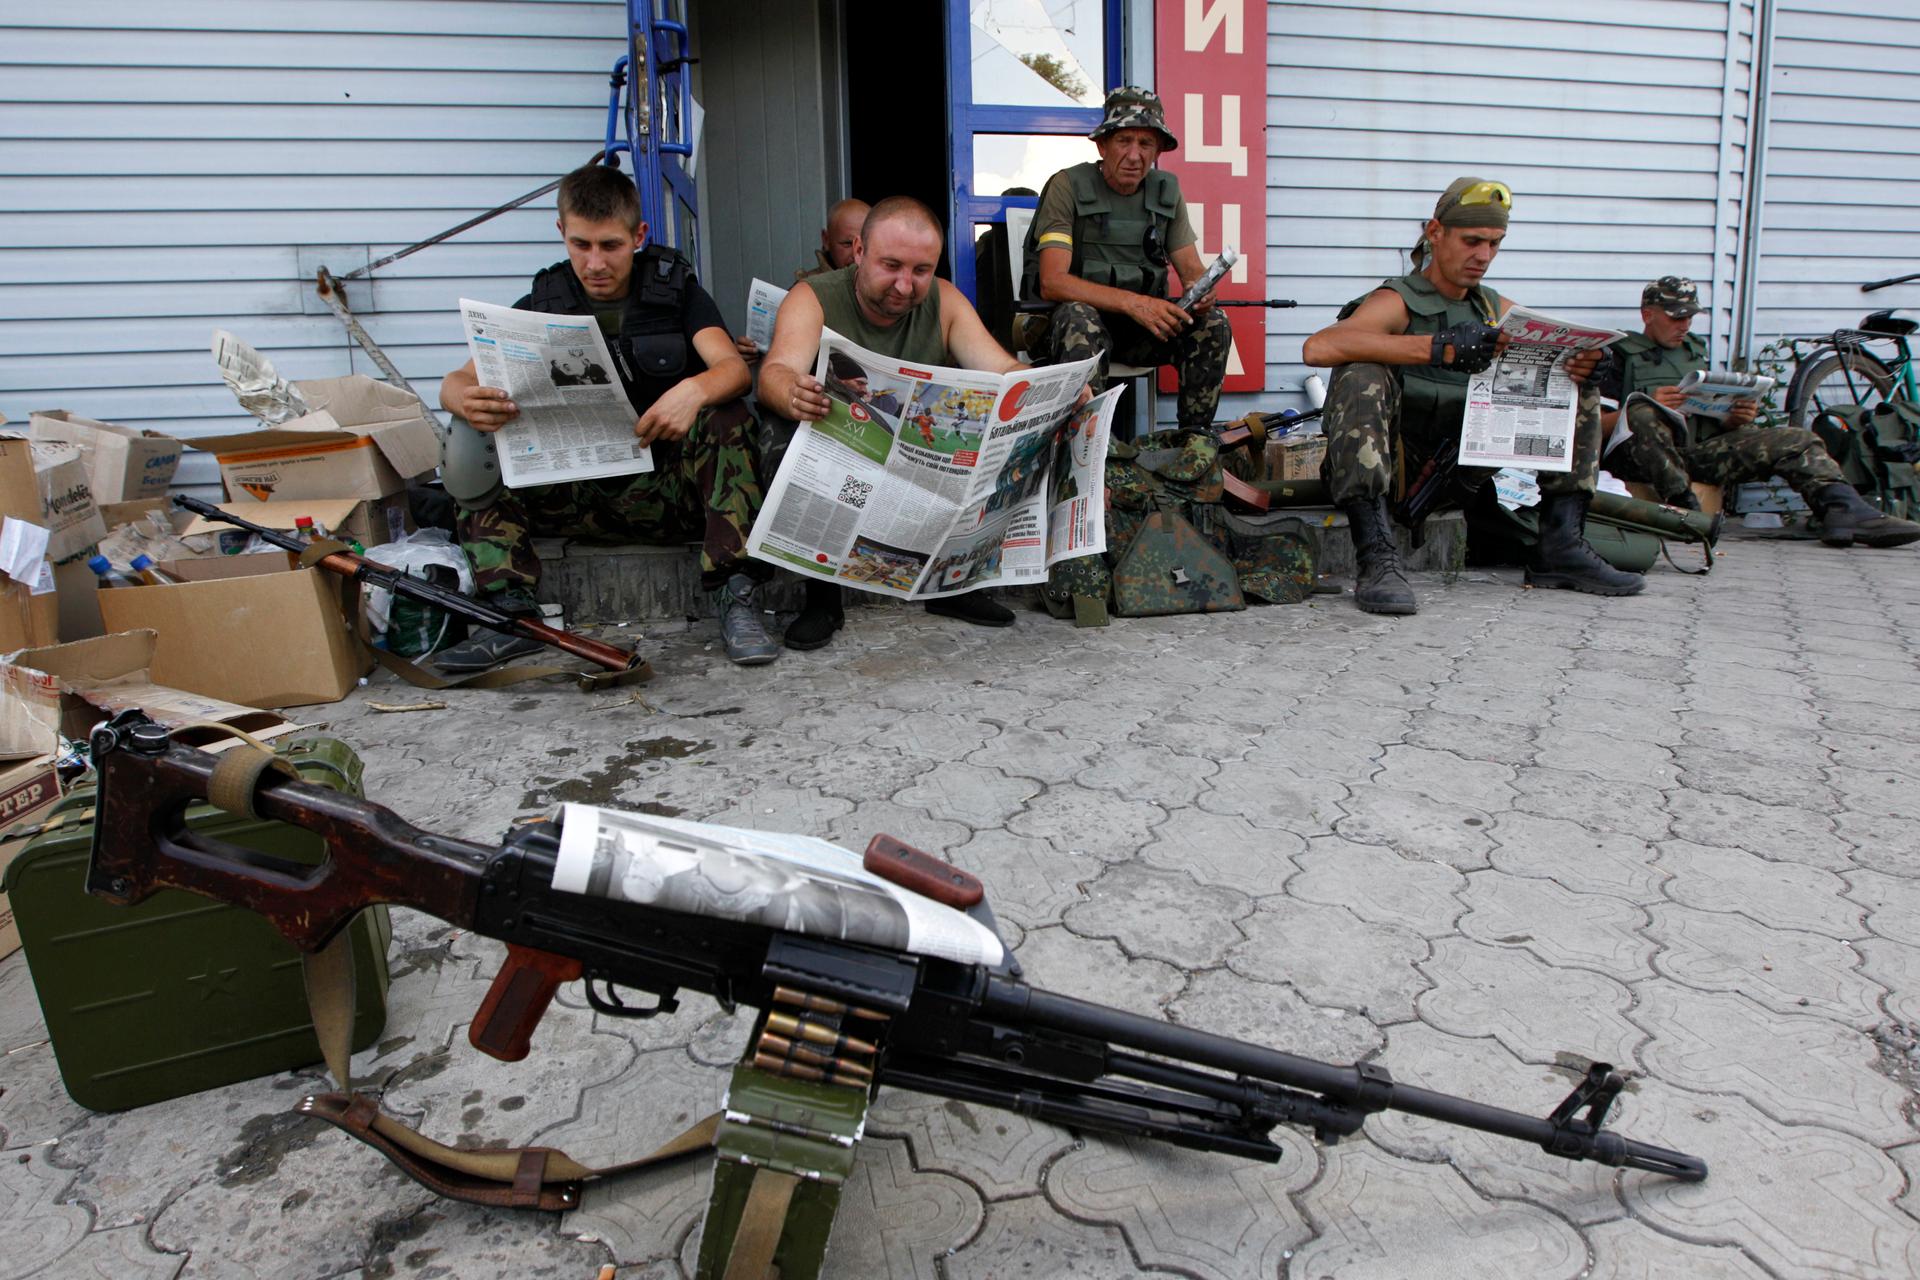 Ukrainian servicemen read newspapers as they rest at a checkpoint near the eastern Ukrainian town of Debaltseve in the Donetsk Region on August 6, 2014.